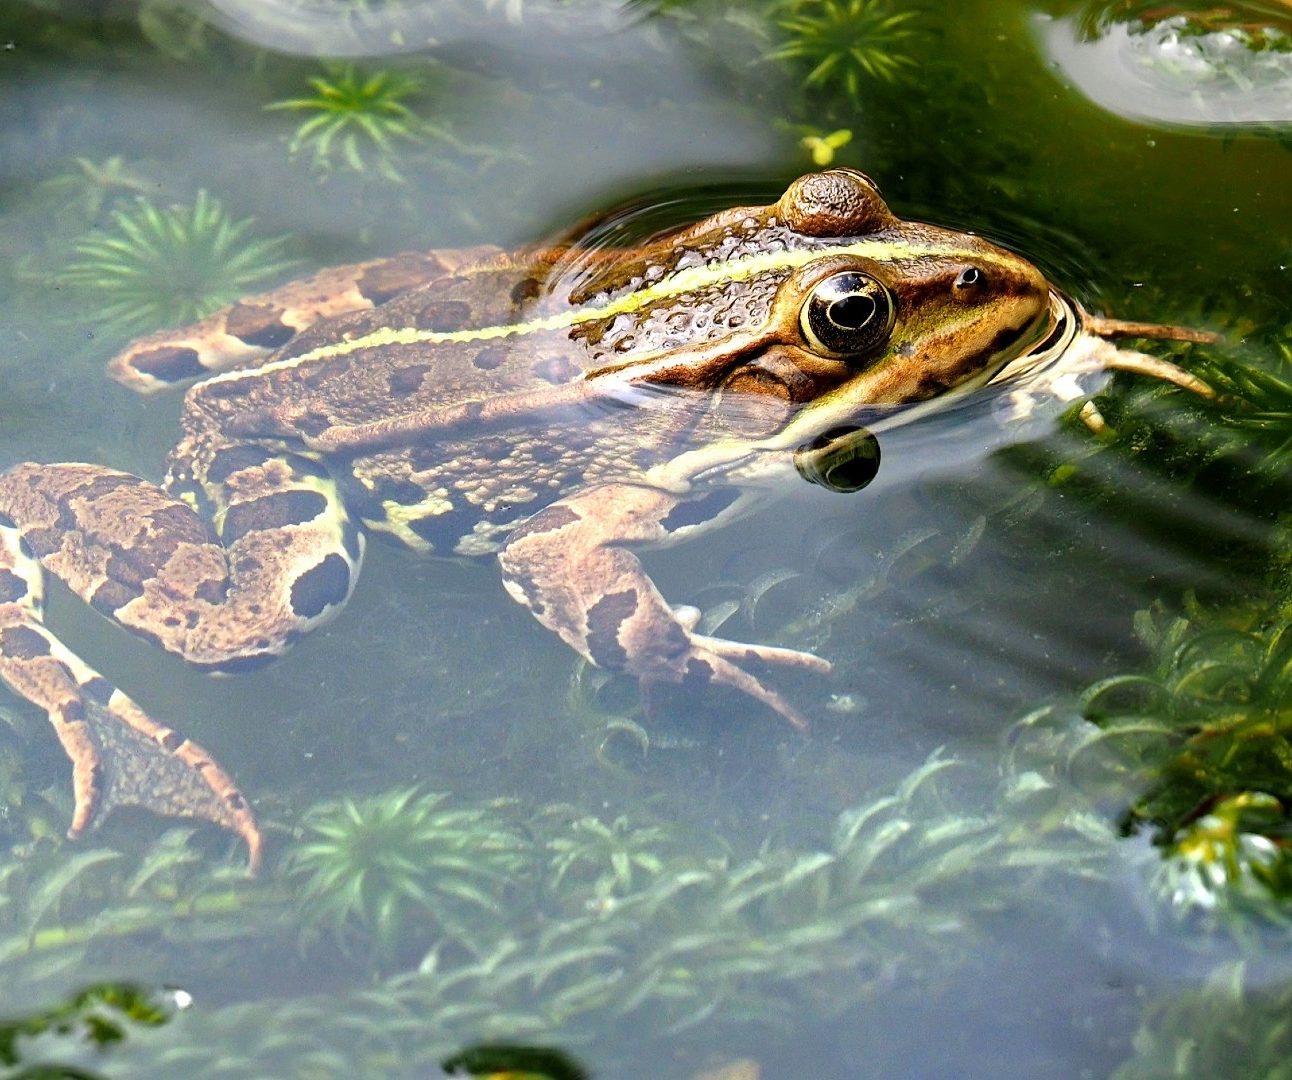 A frog swimming in a pond